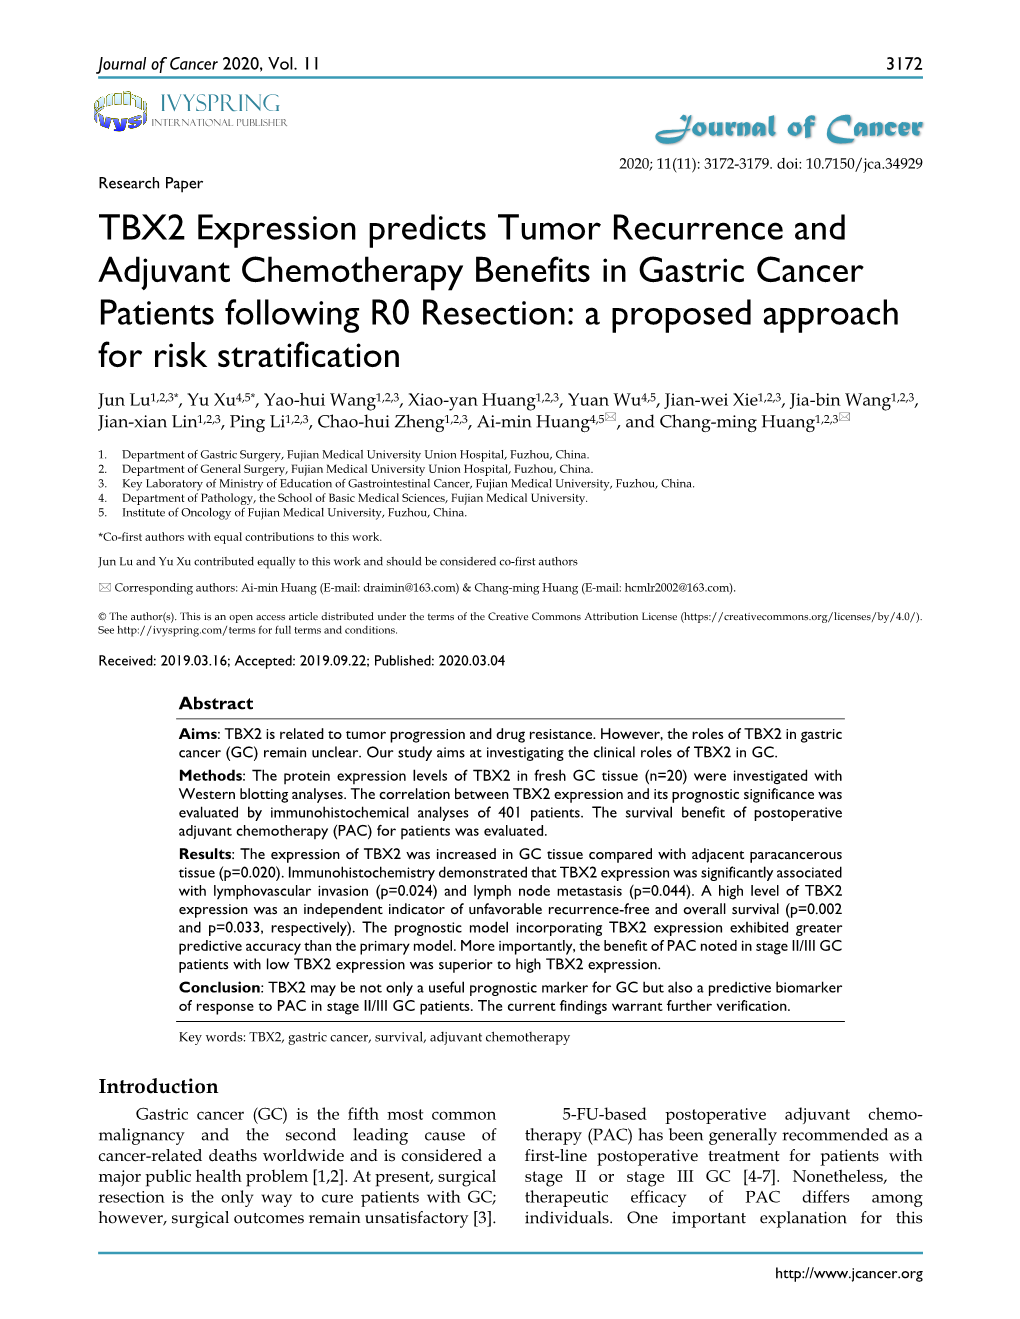 TBX2 Expression Predicts Tumor Recurrence and Adjuvant